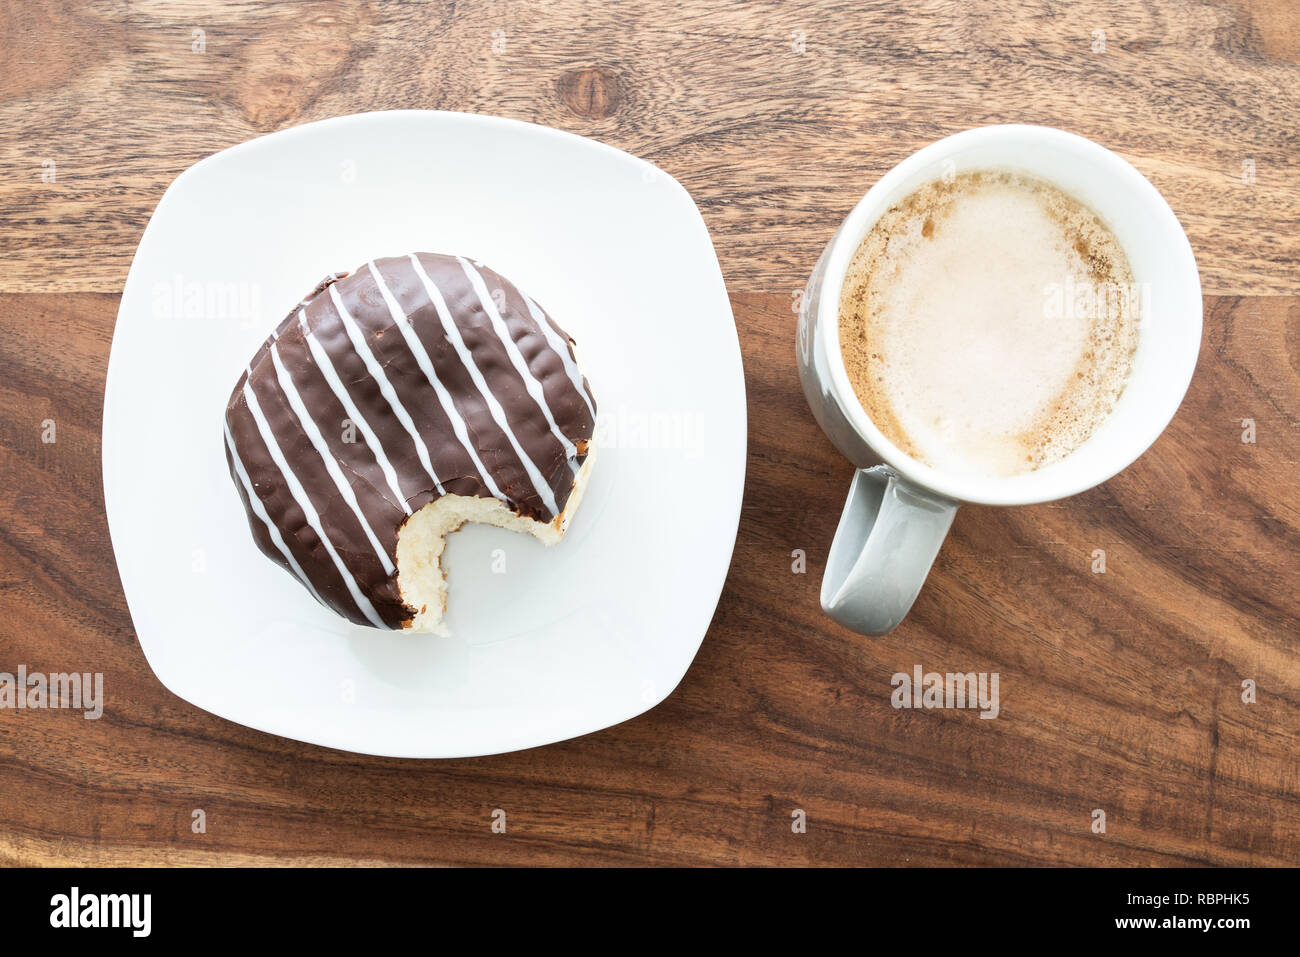 Chocolats jelly donut on wooden table Banque D'Images